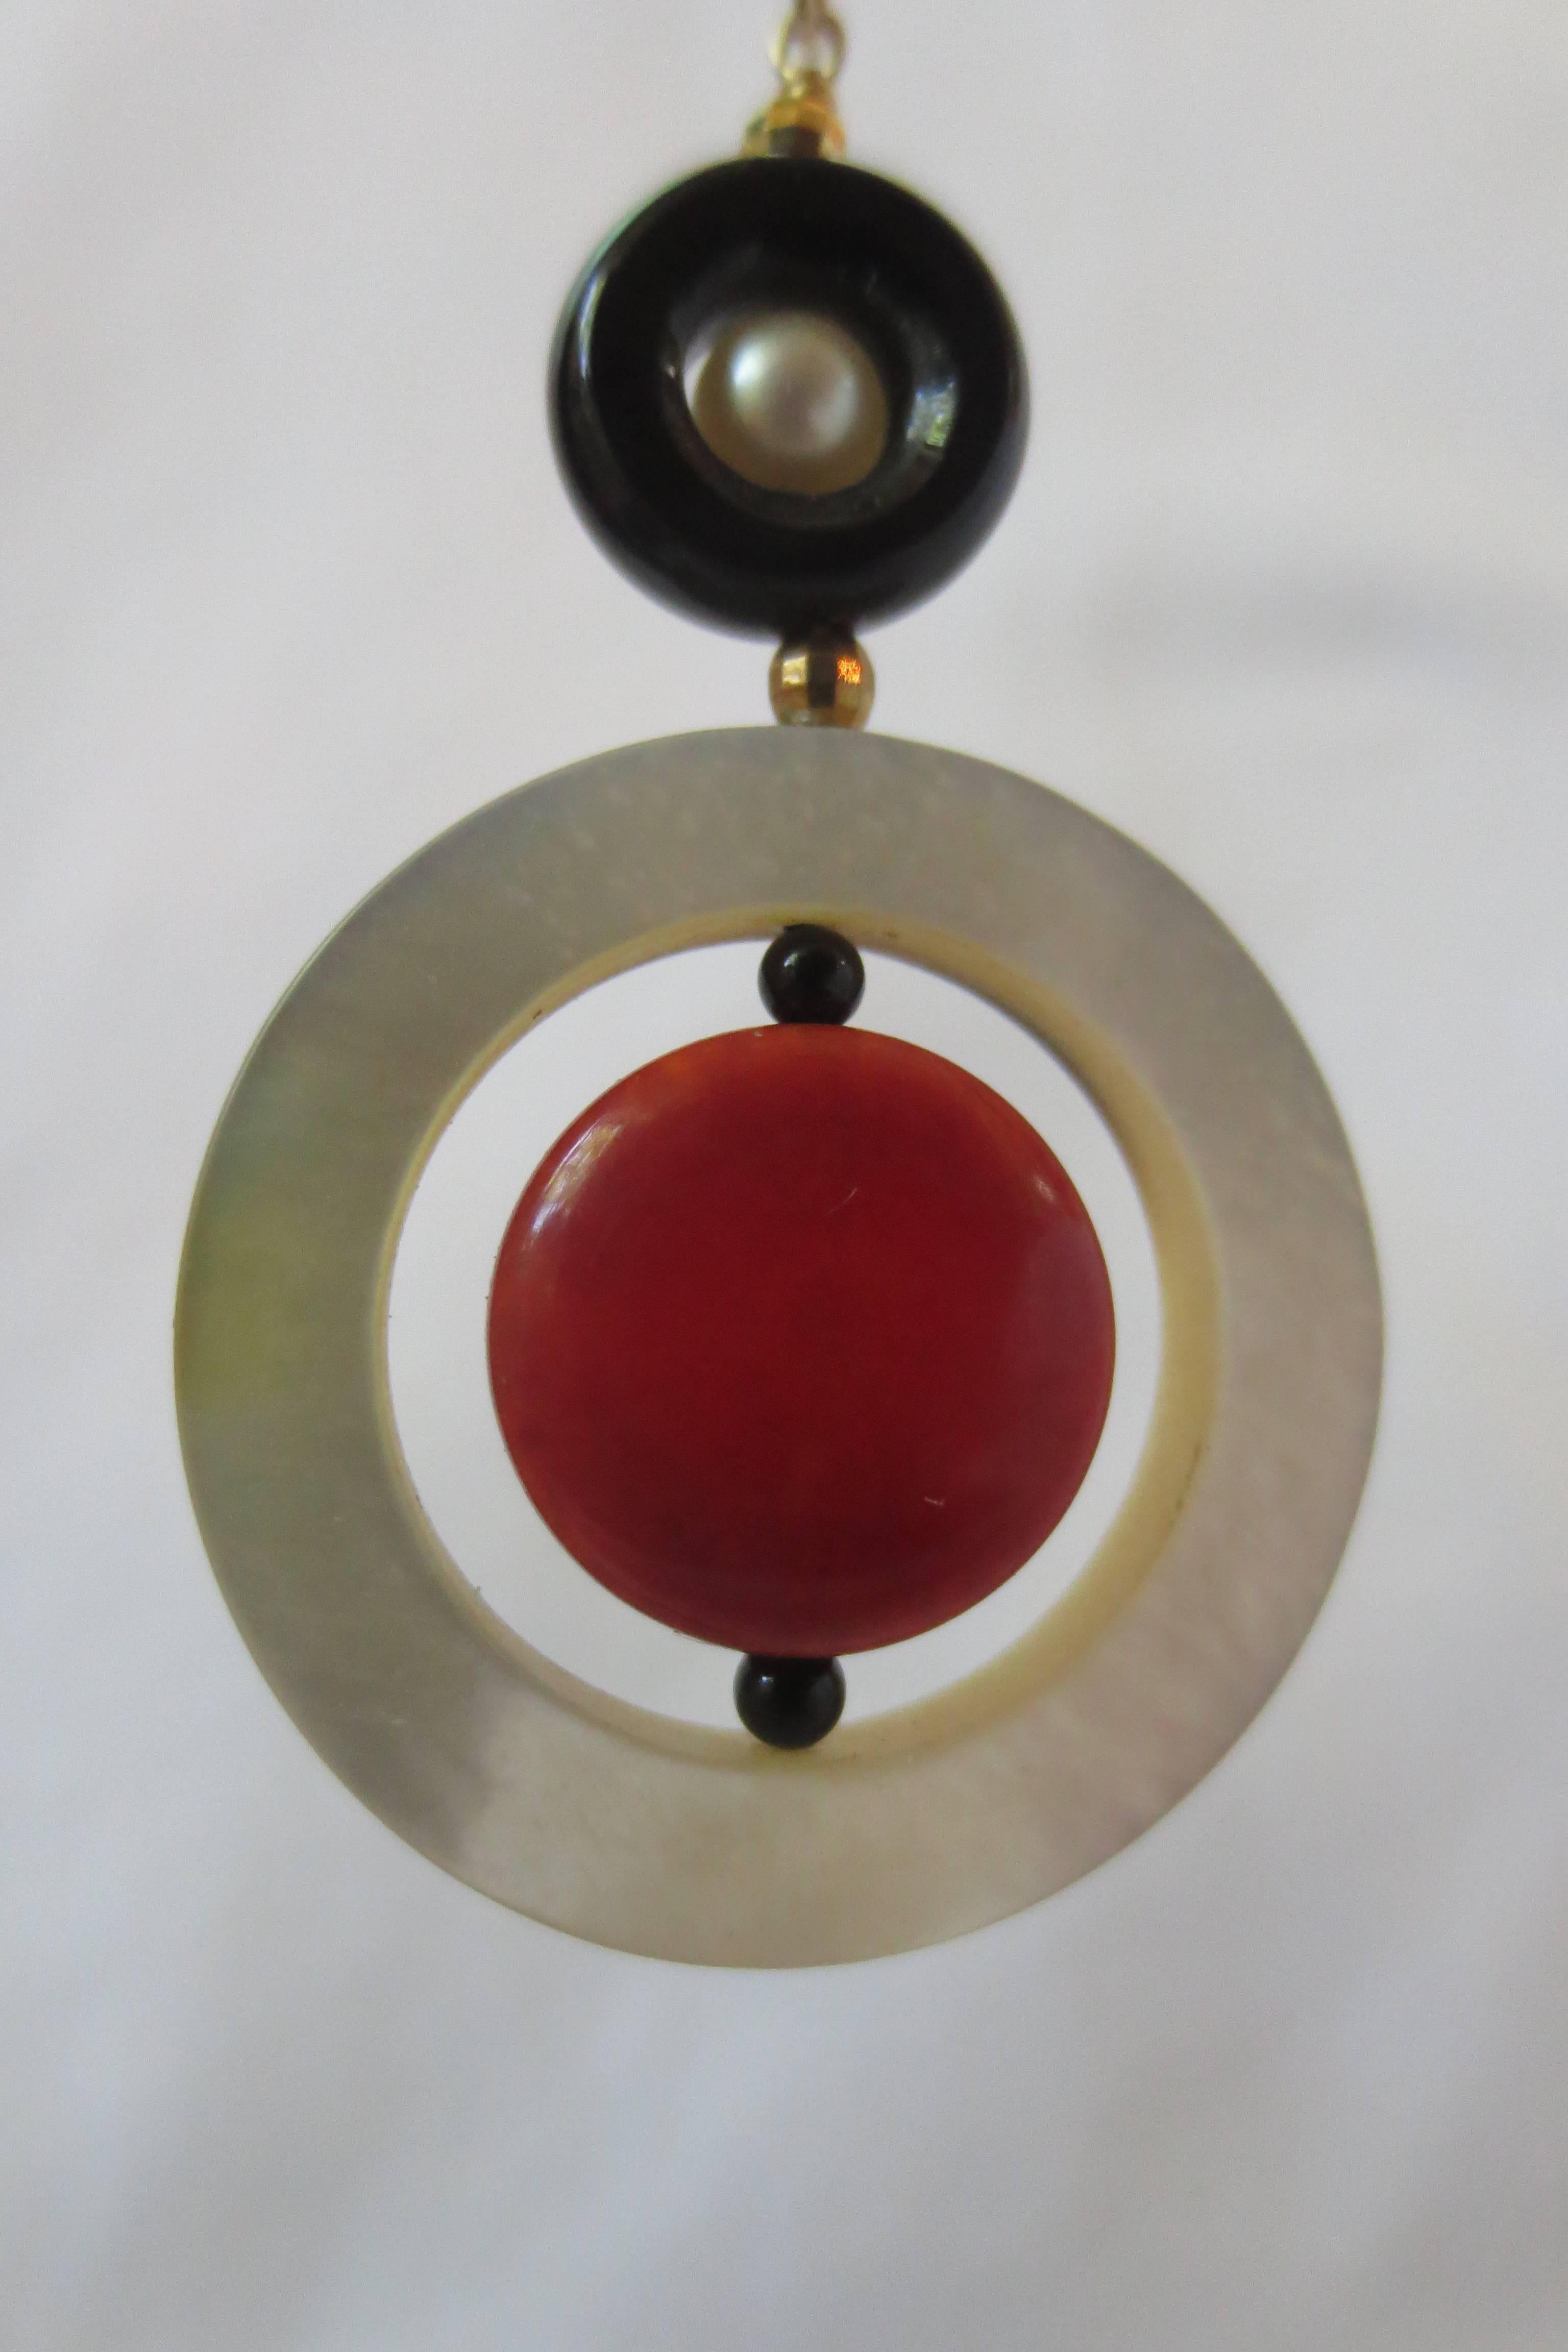 These playful yet interesting earrings are sure to strike a conversation. On top, a round 3 mm pearl is nested in an onyx torus. Below, a round and flat coral bead, is suspended in a large mother-of-pearl ring. The coral bead can spin freely.